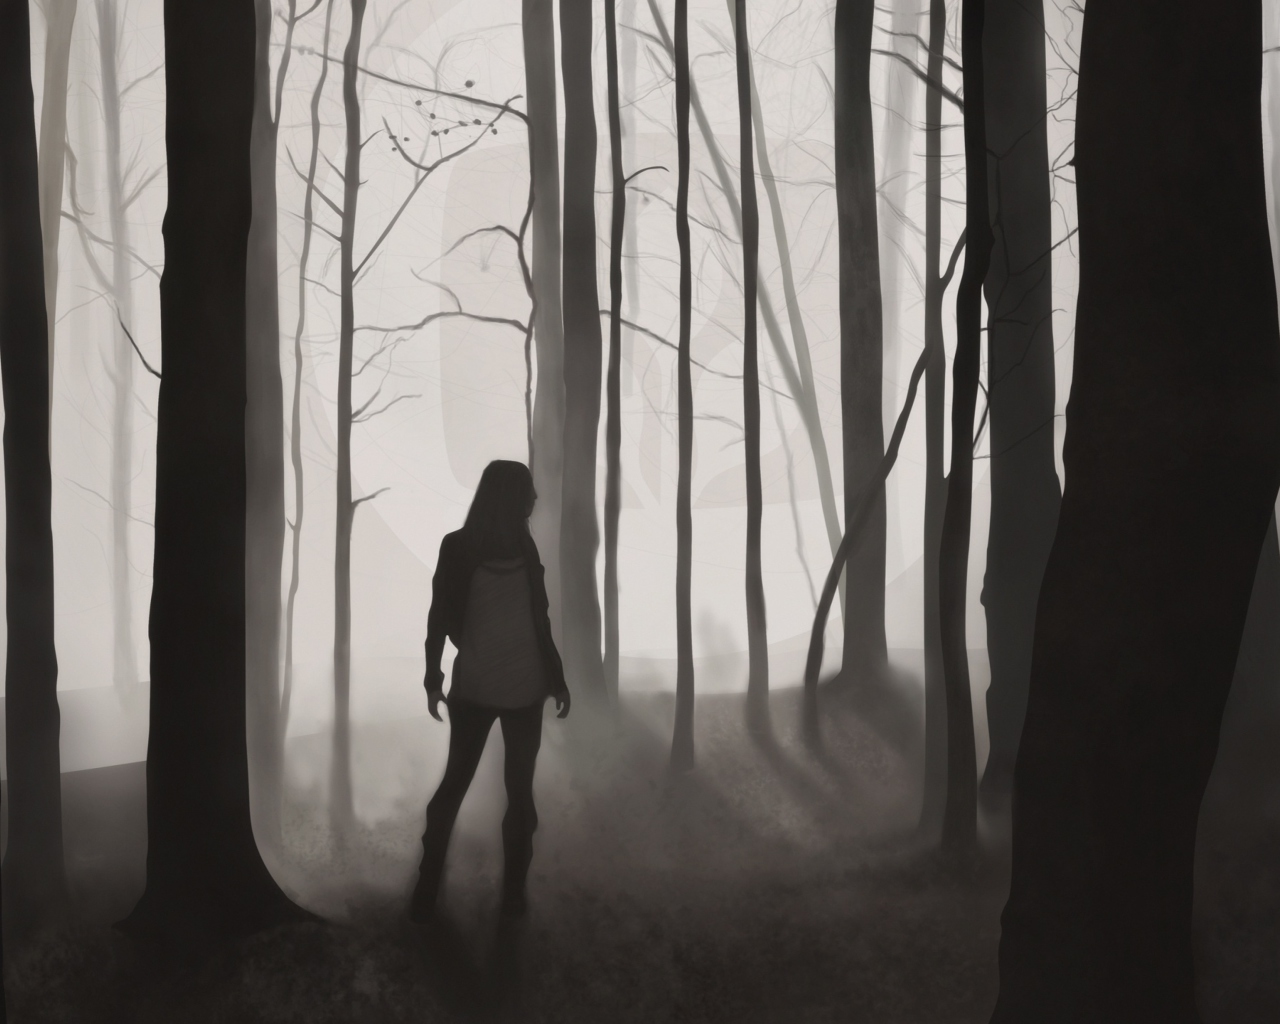 Girl In Forest Drawing screenshot #1 1280x1024